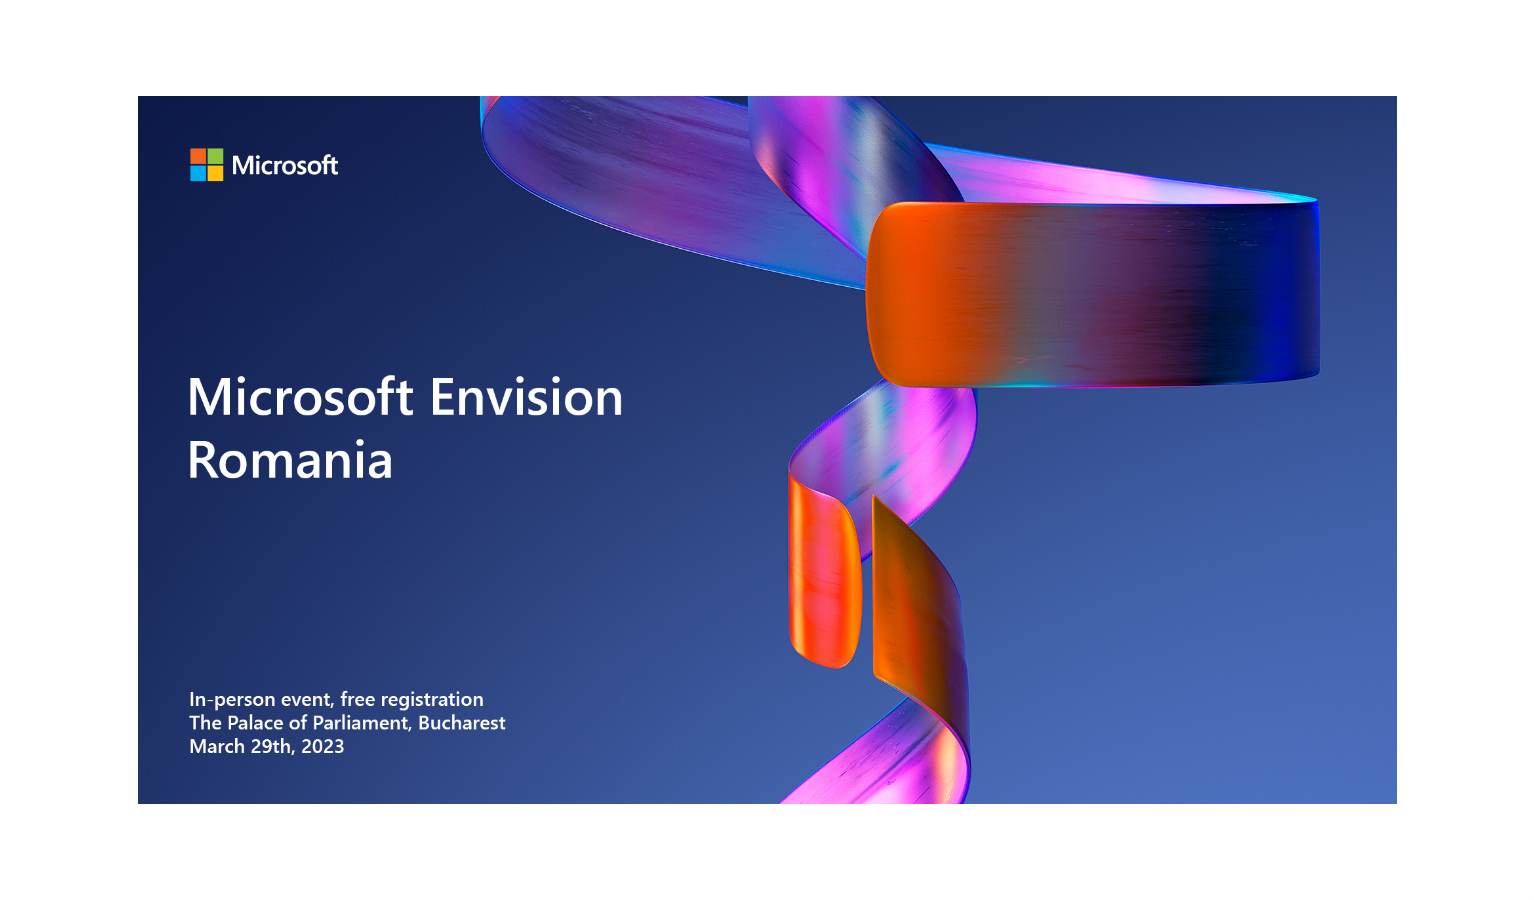 About the present, future, innovation and digitalization of business, at Microsoft Envision Romania